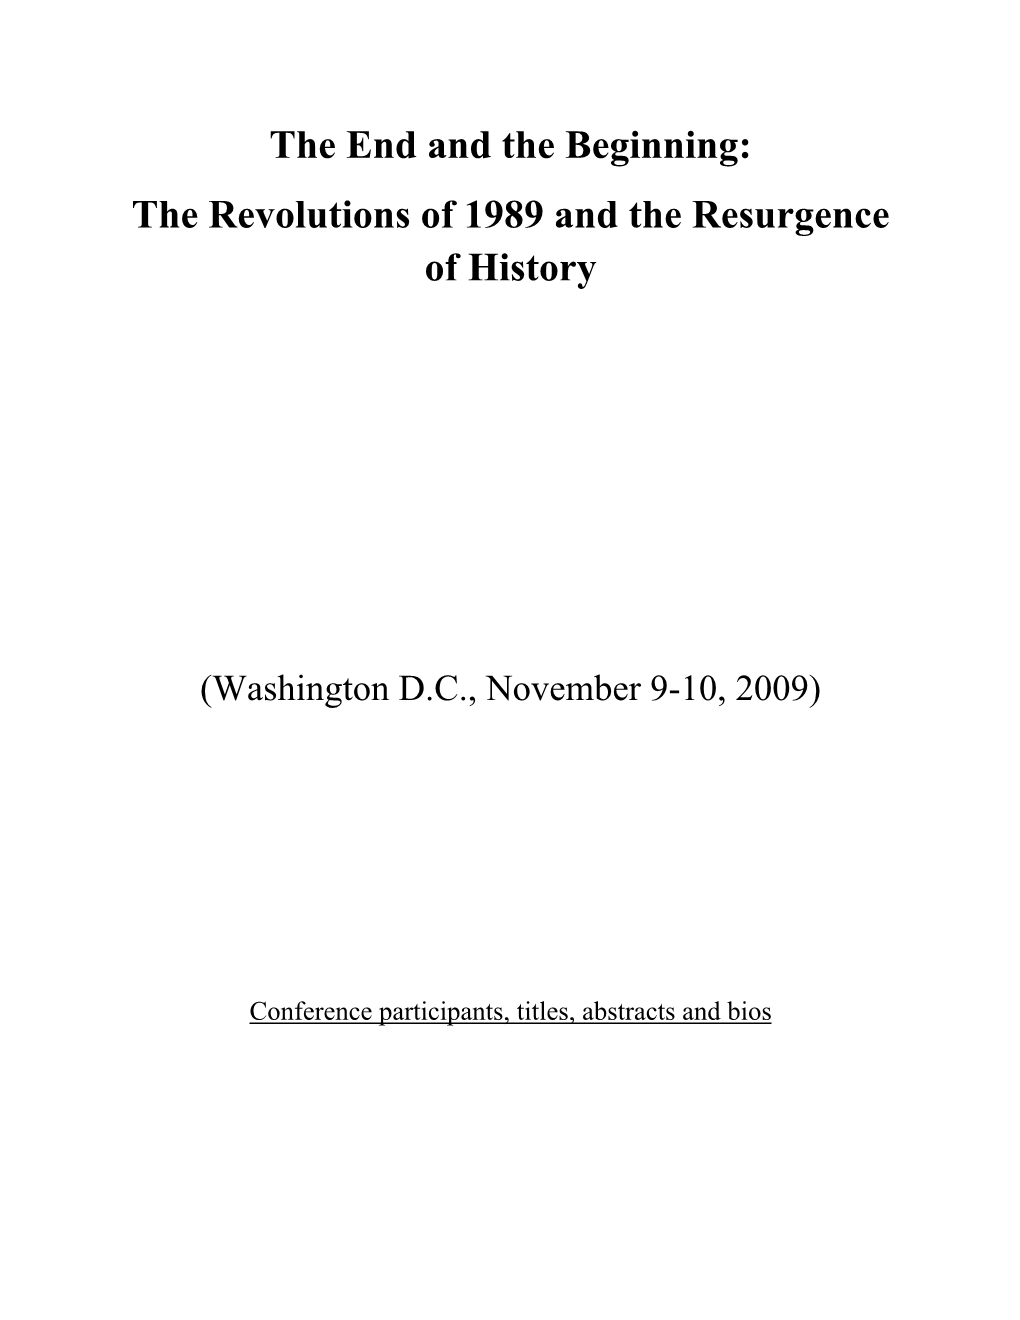 The Revolutions of 1989 and the Resurgence of History